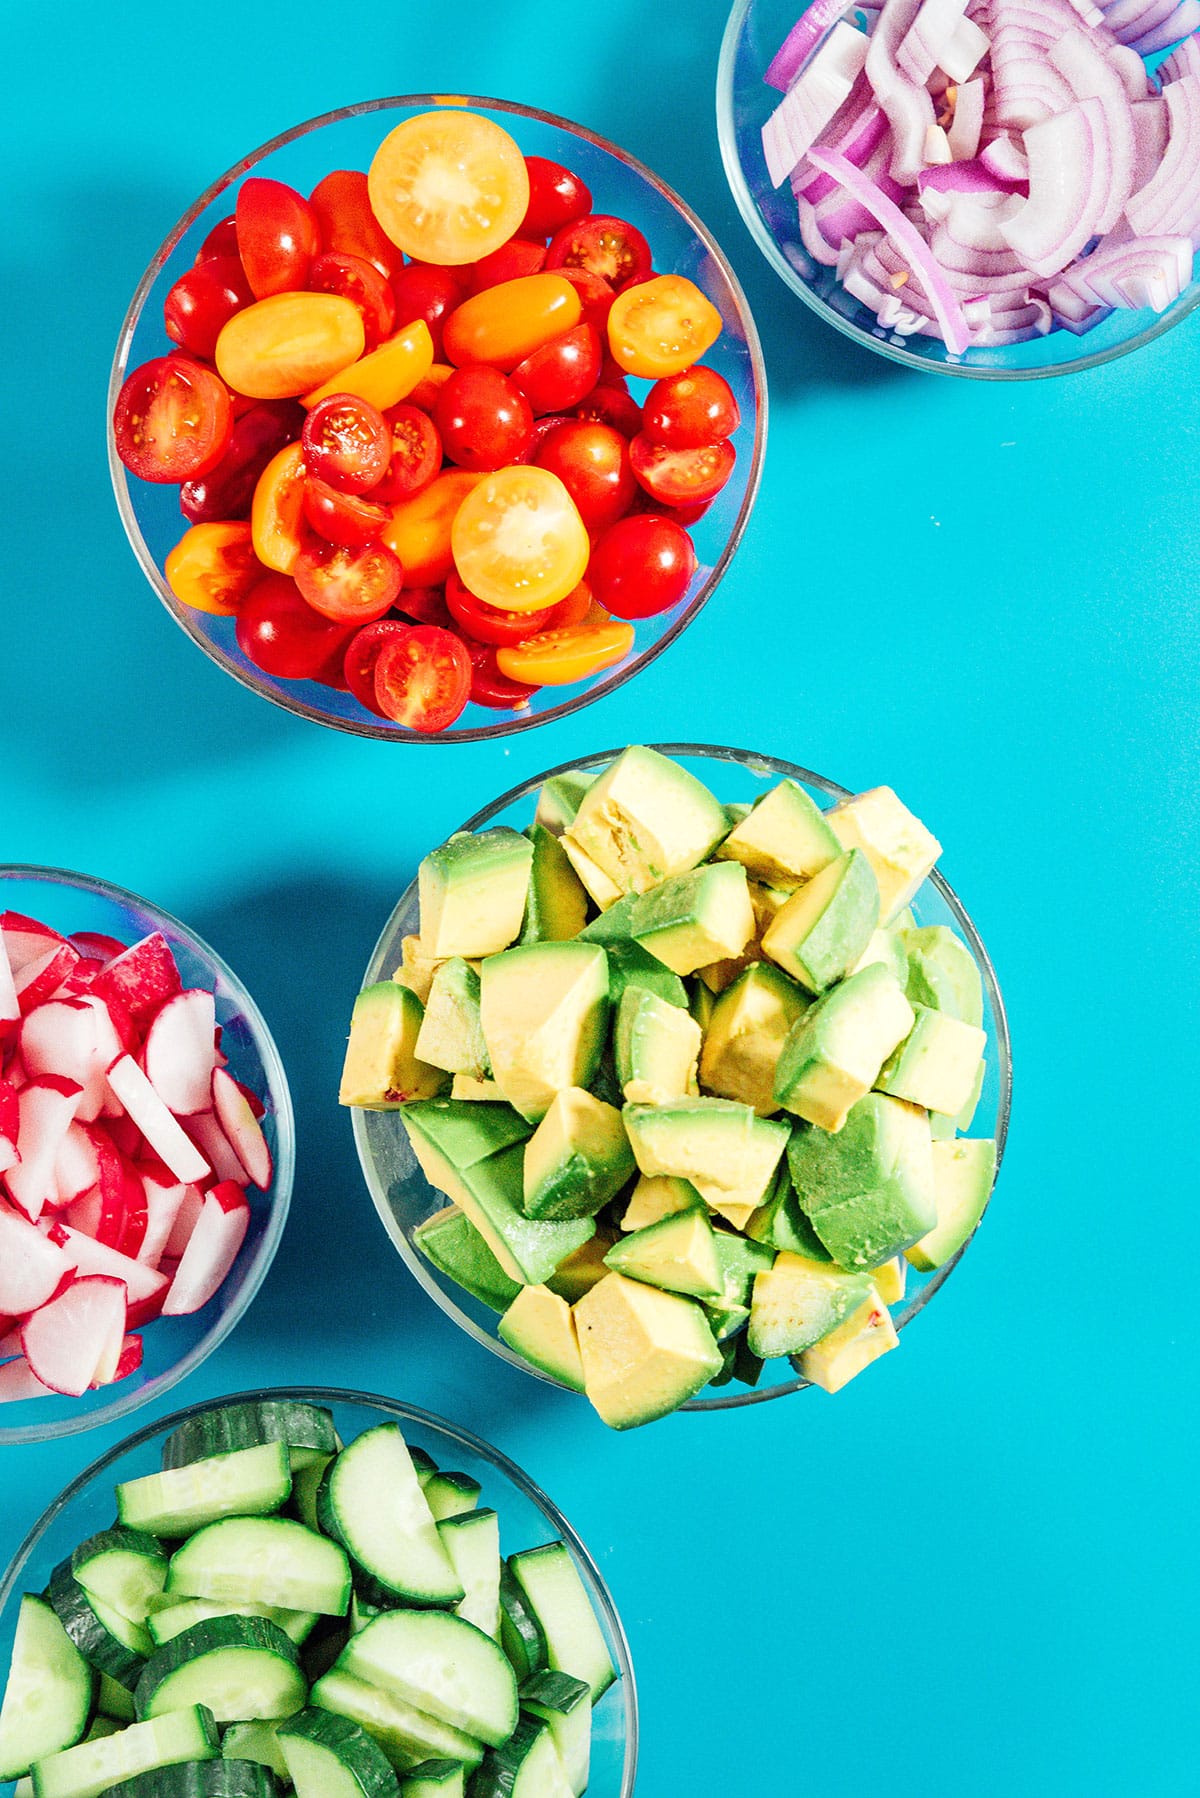 Separate bowls of bite-sized avocados, cherry tomatoes, and radishes sit on a blue background. The bowls are clear glass.